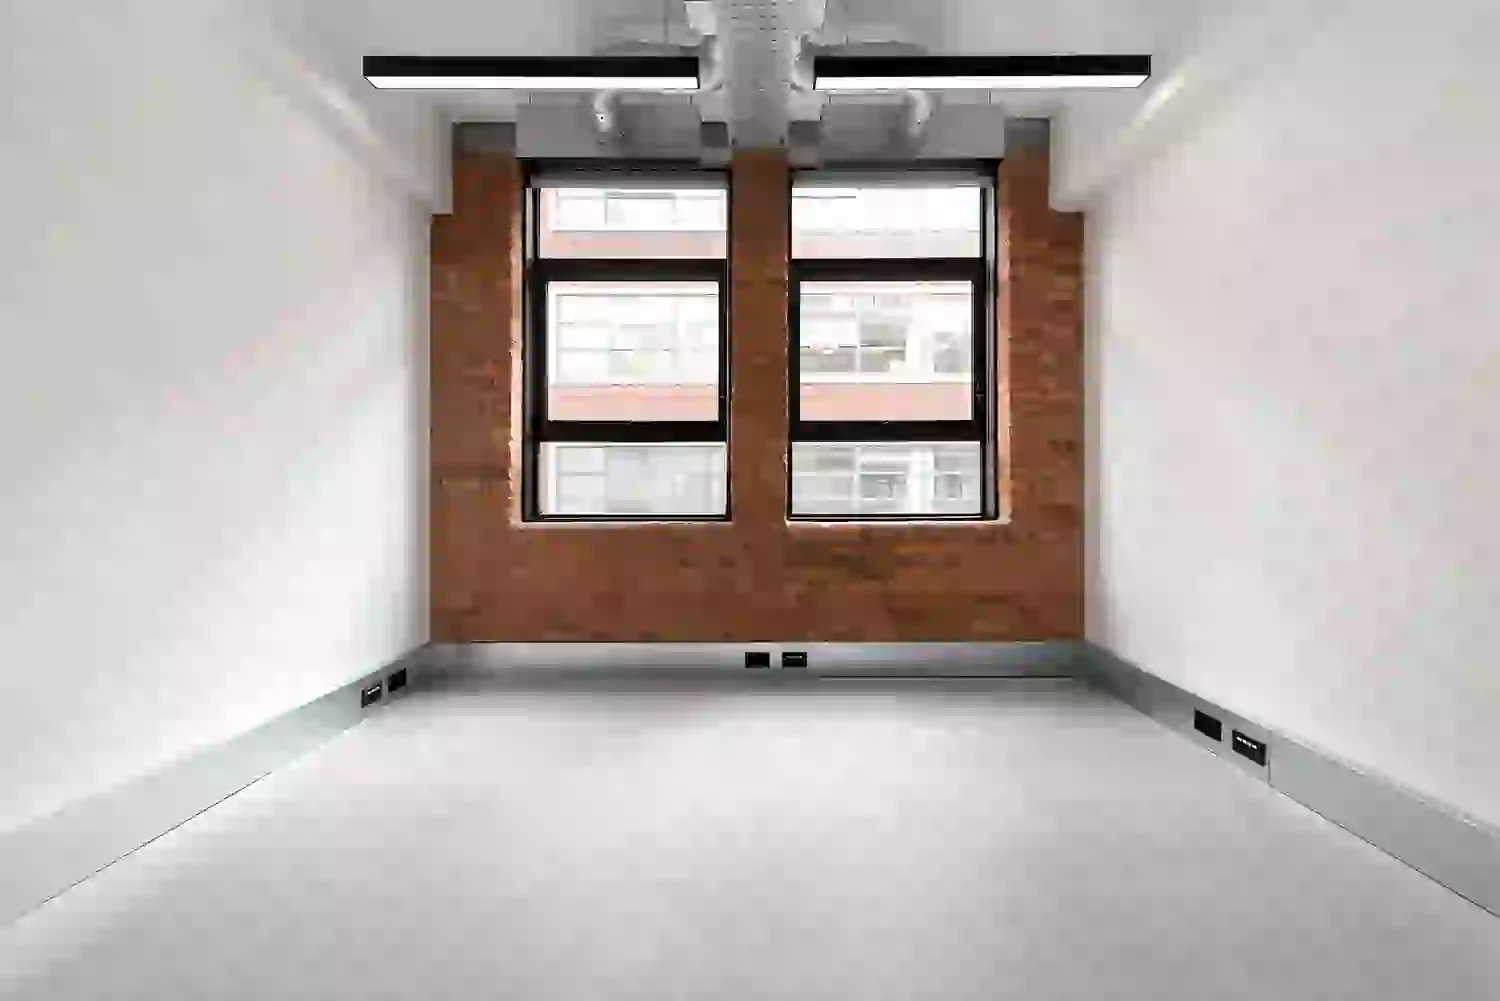 Office space to rent at Ink Rooms, 25-37 Easton Street, Clerkenwell, London, unit IR.1.05, 176 sq ft (16 sq m).